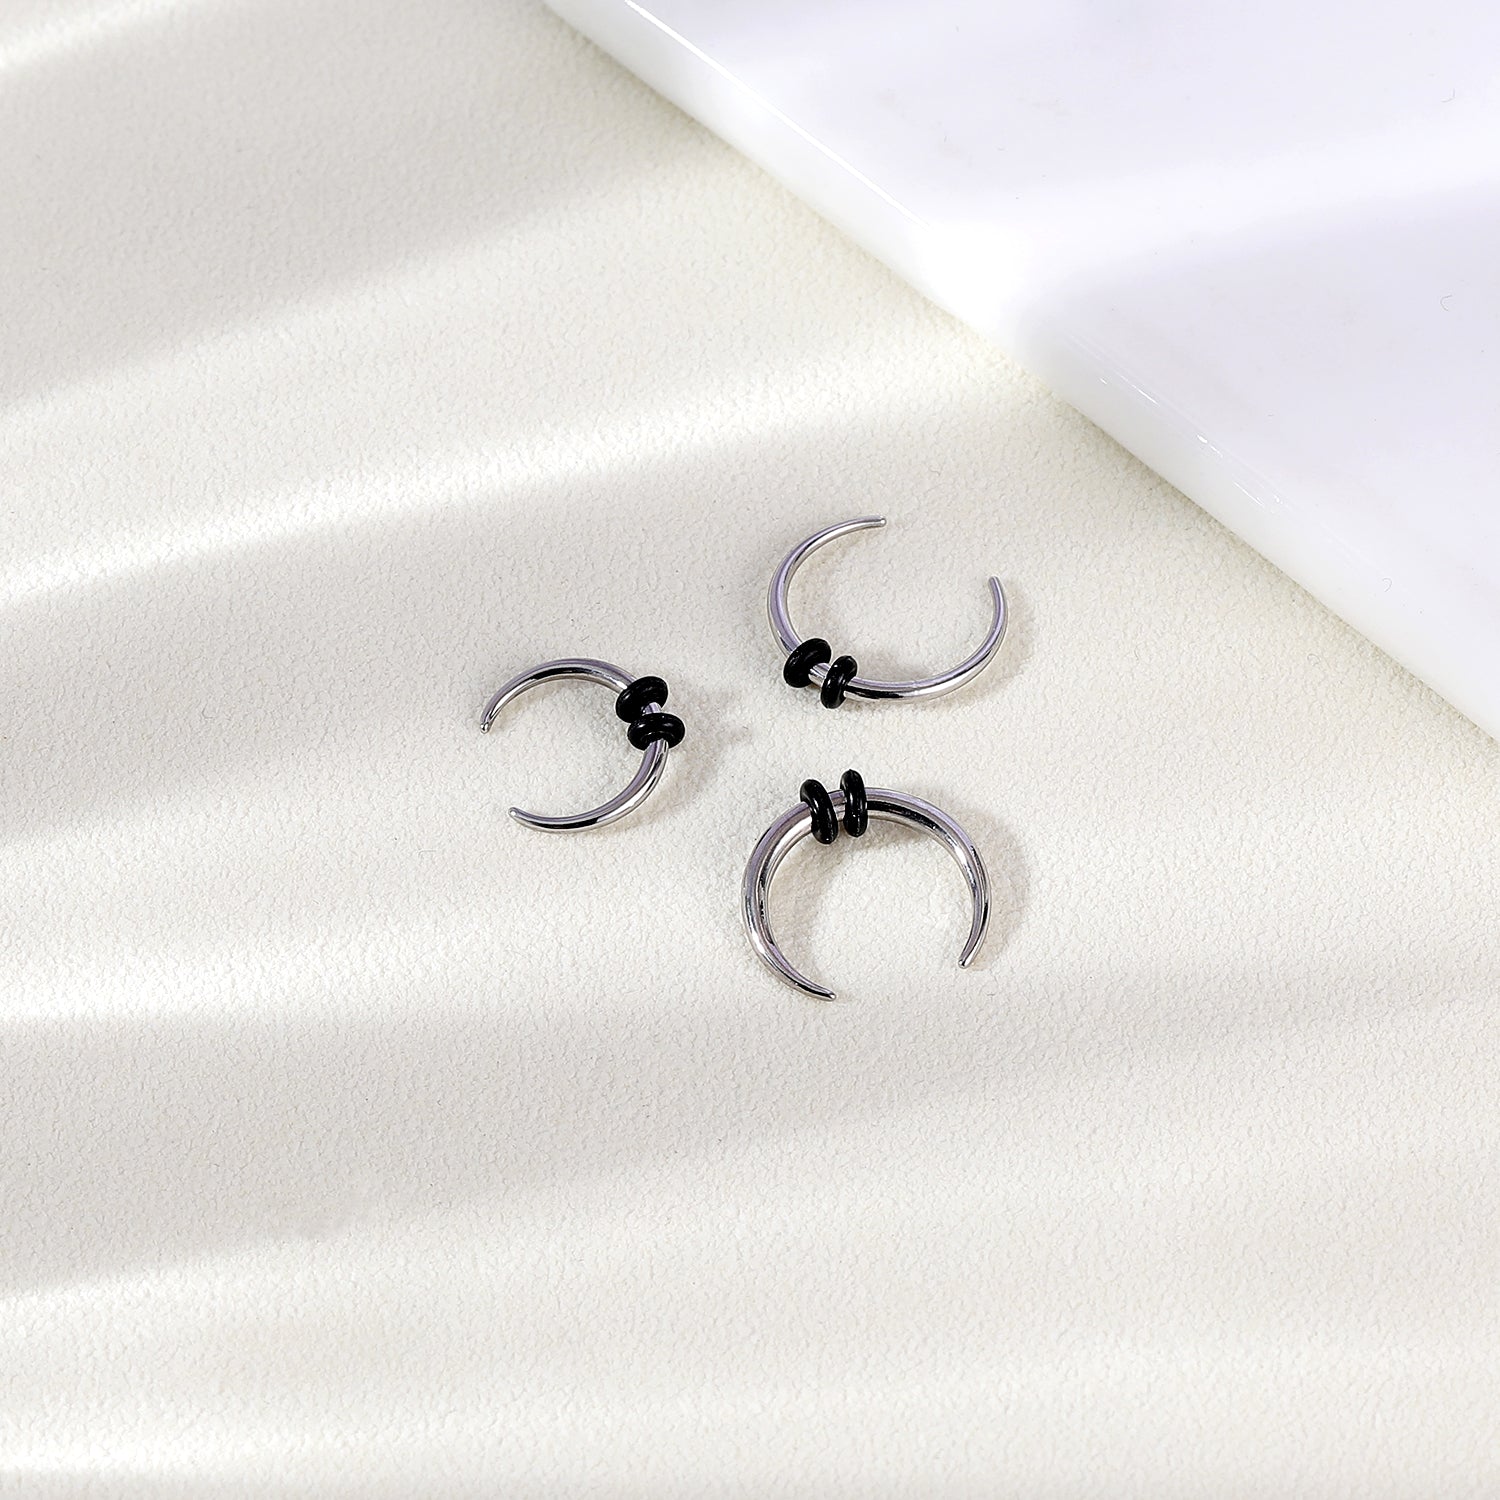 14G-16G-Cowhorn-Nose-Rings-C-Shape-Nose-Piercing-Stainless-Steel-Nostril-Rings-Piercing